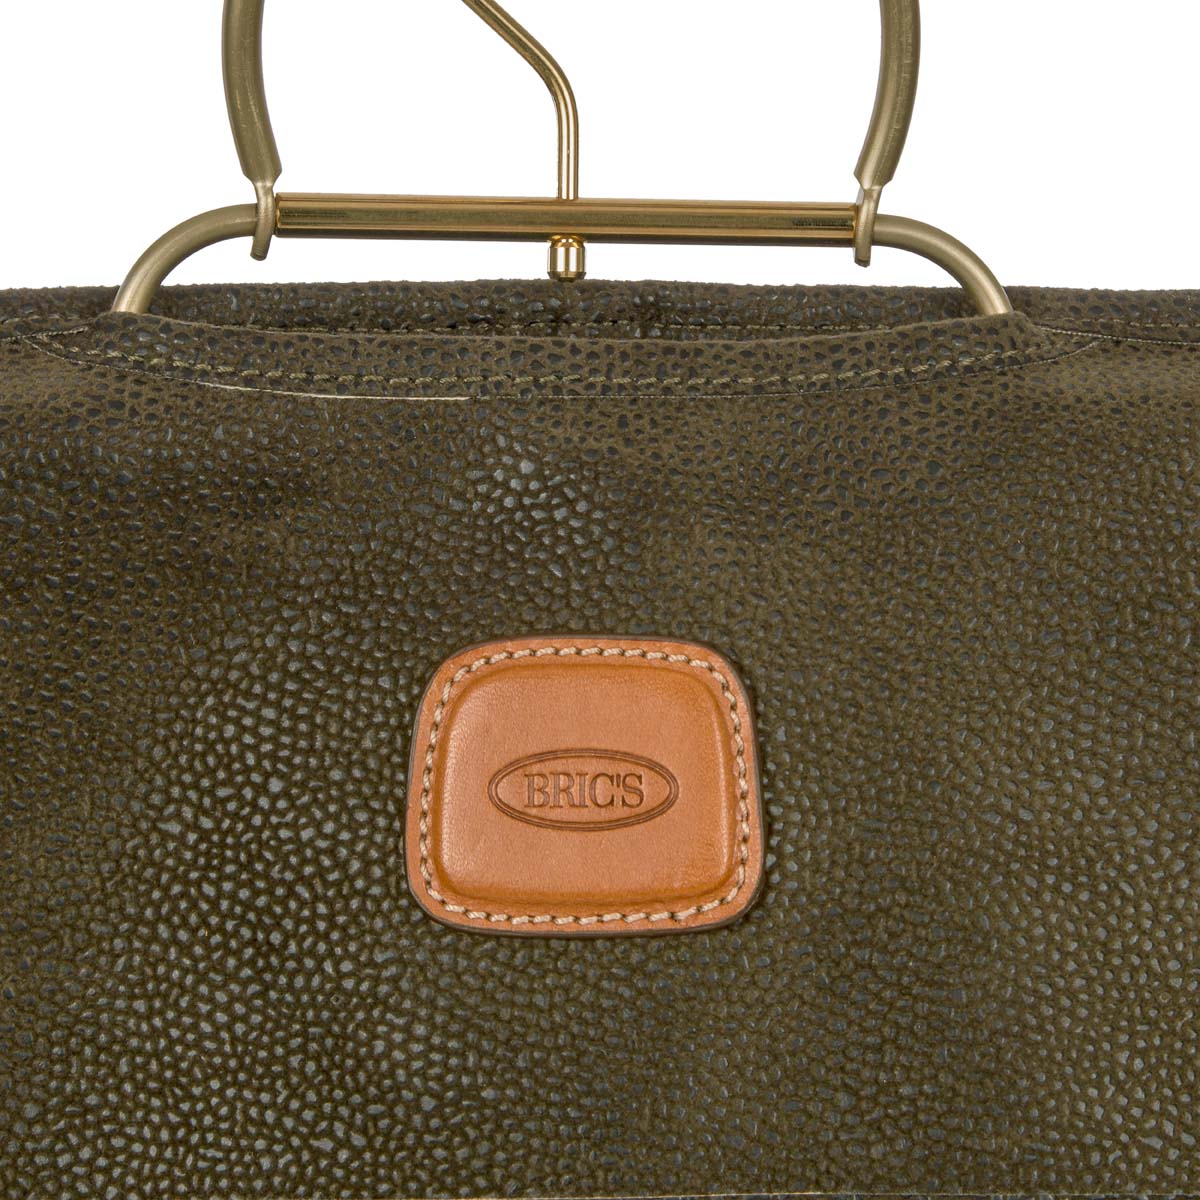 Bric's Life Collection Garment Bag - Olive